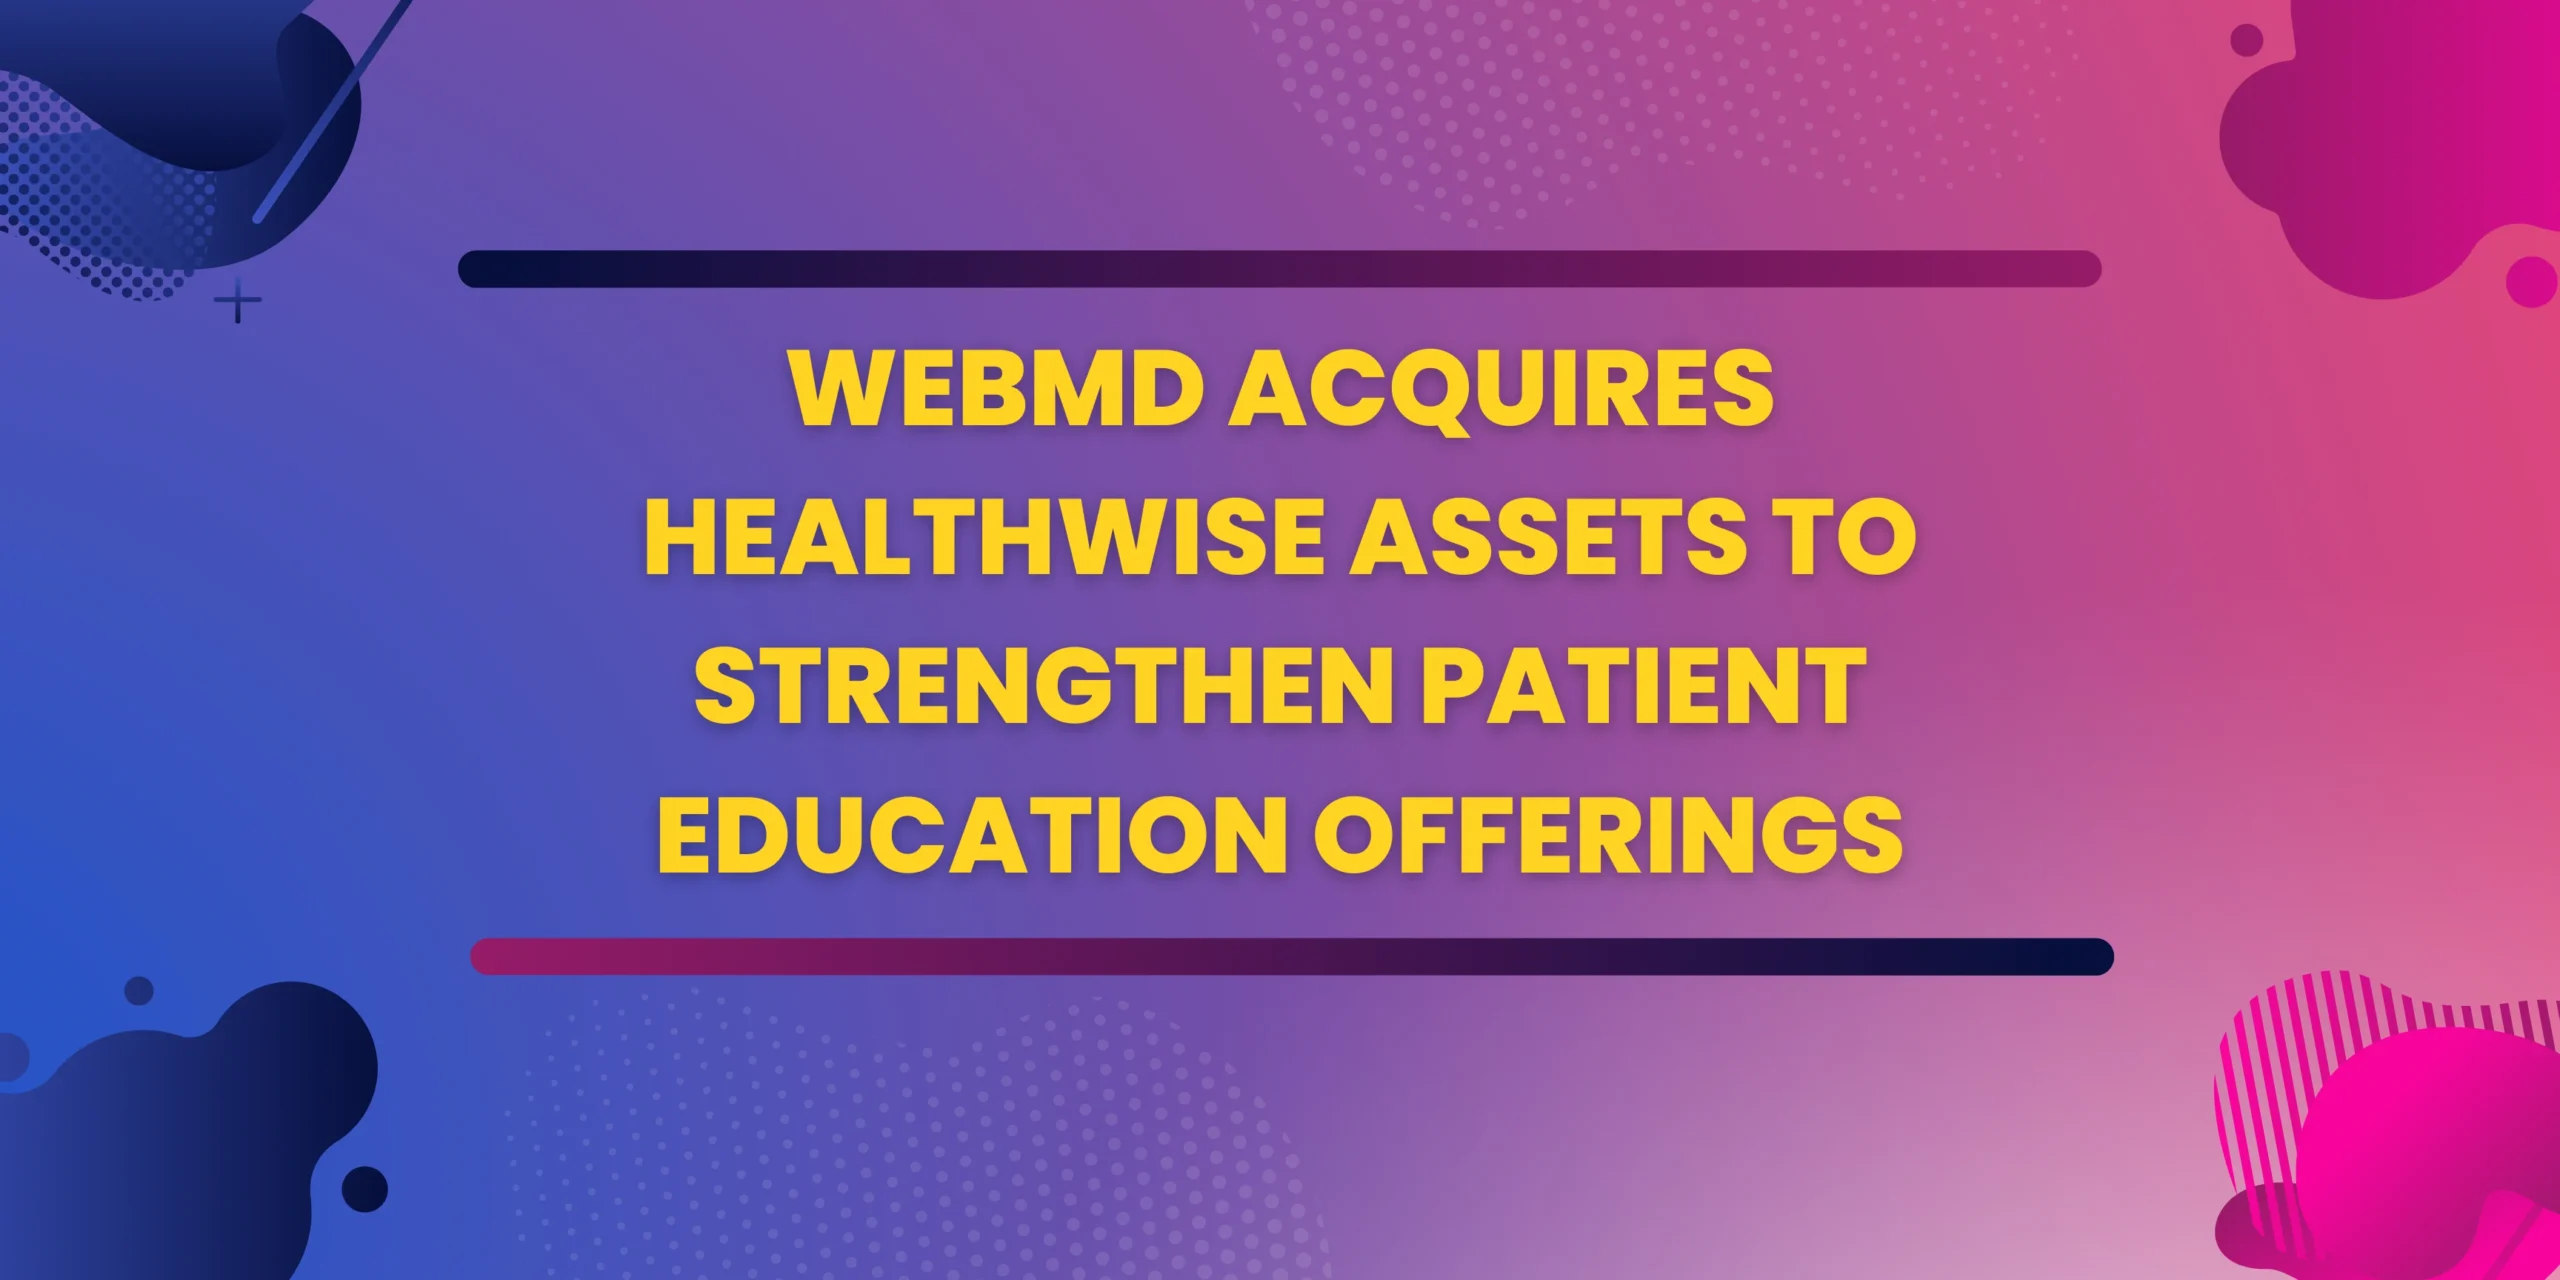 WebMD Acquires Healthwise Assets to Strengthen Patient Education Offerings